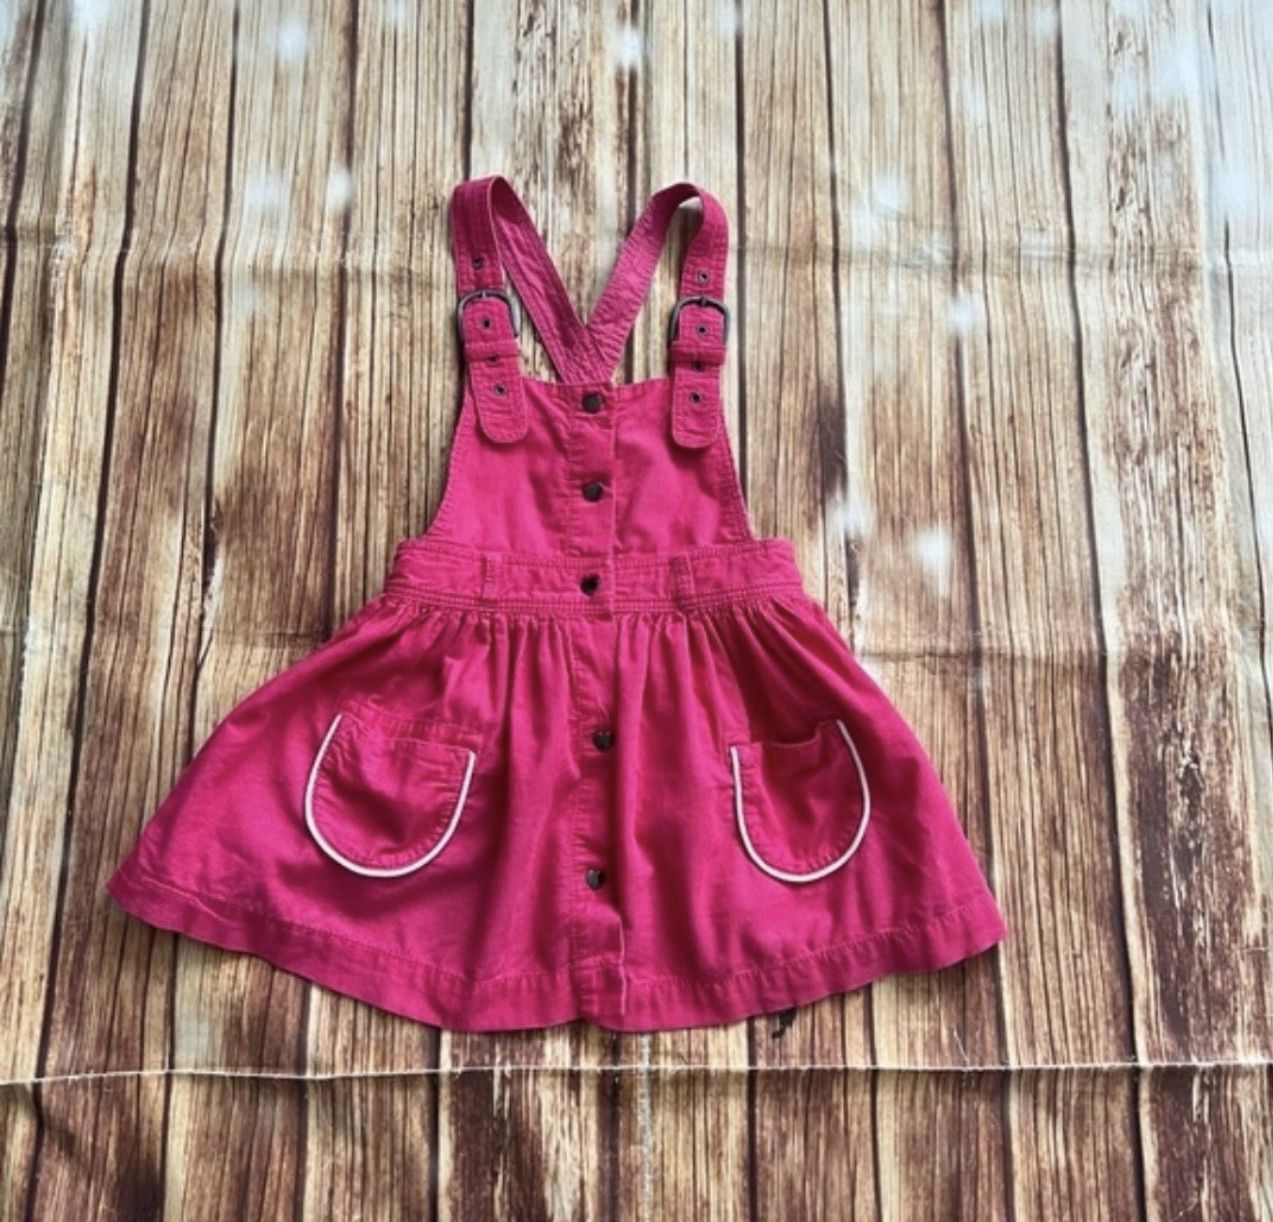 H&M Toddler Girls Corduroy Dress Overall Pink Size 4-5 Years